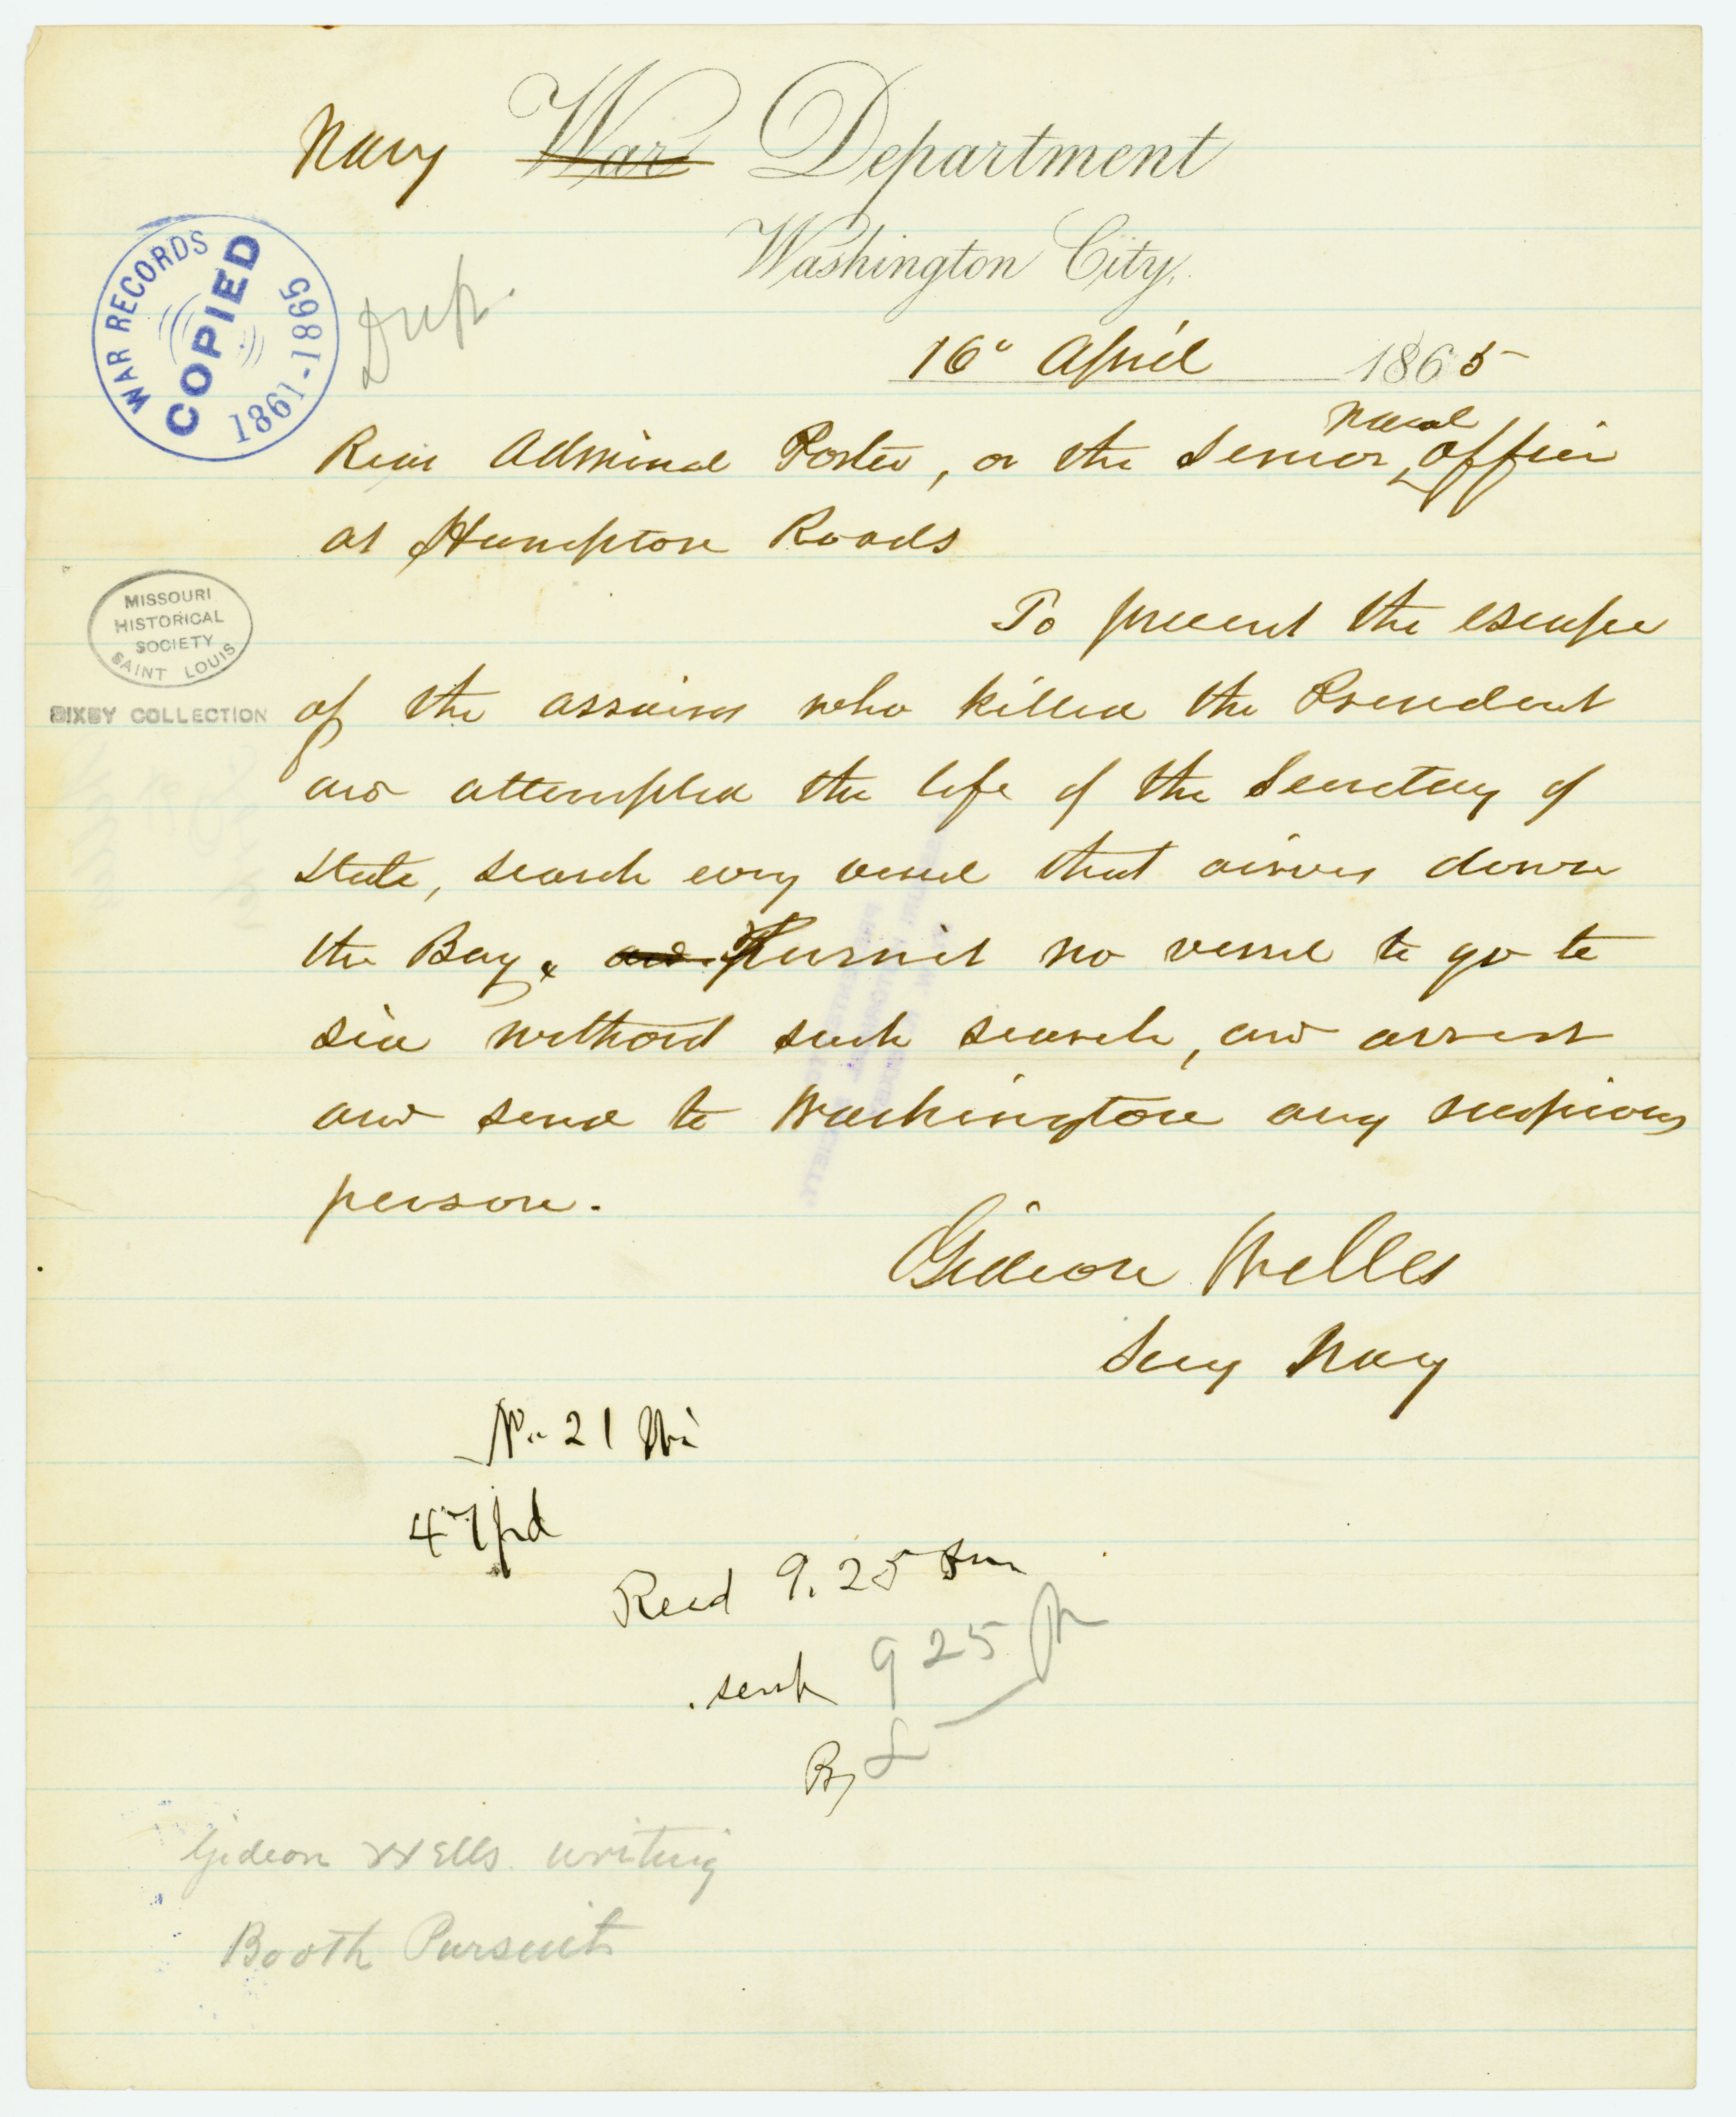 Contemporary copy of telegram of Gideon Welles, Secy. Navy, Navy Department, Washington City, to Rear Admiral Porter [David D. Porter], or the senior naval officer at Hampton Roads, April 16, 1865